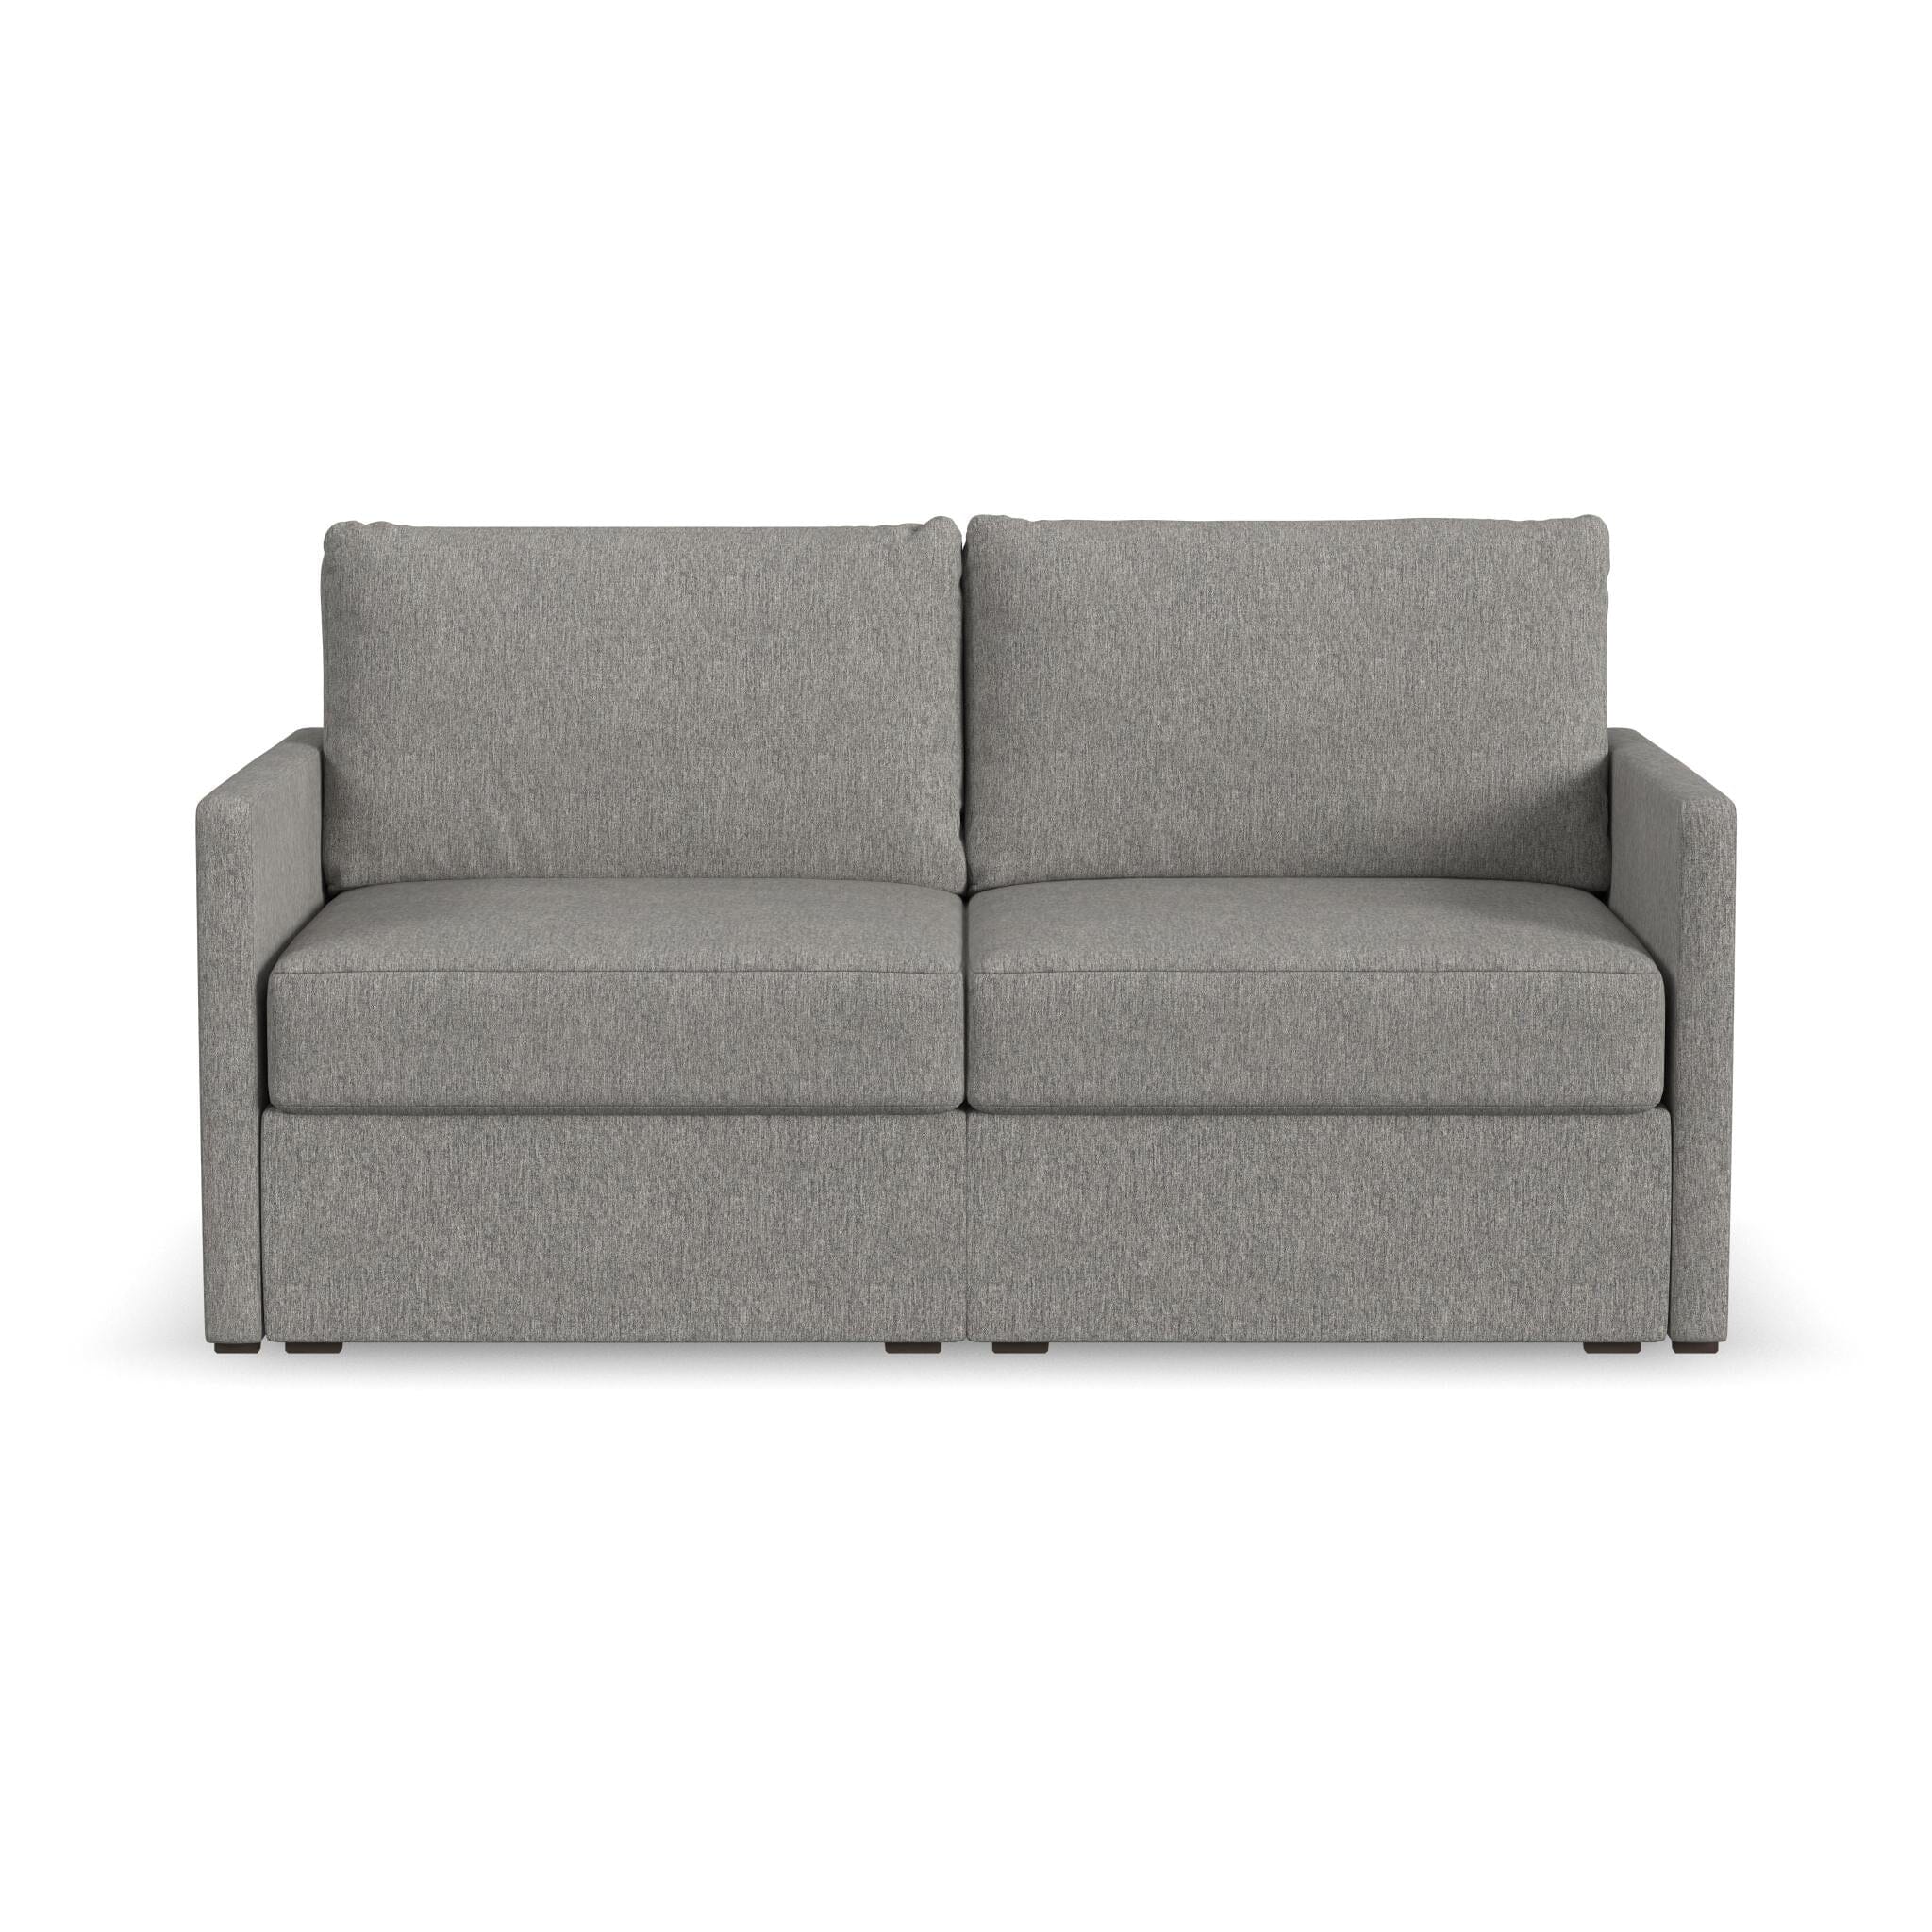 Traditional Loveseat with Narrow Arm By Flex Loveseat Flex